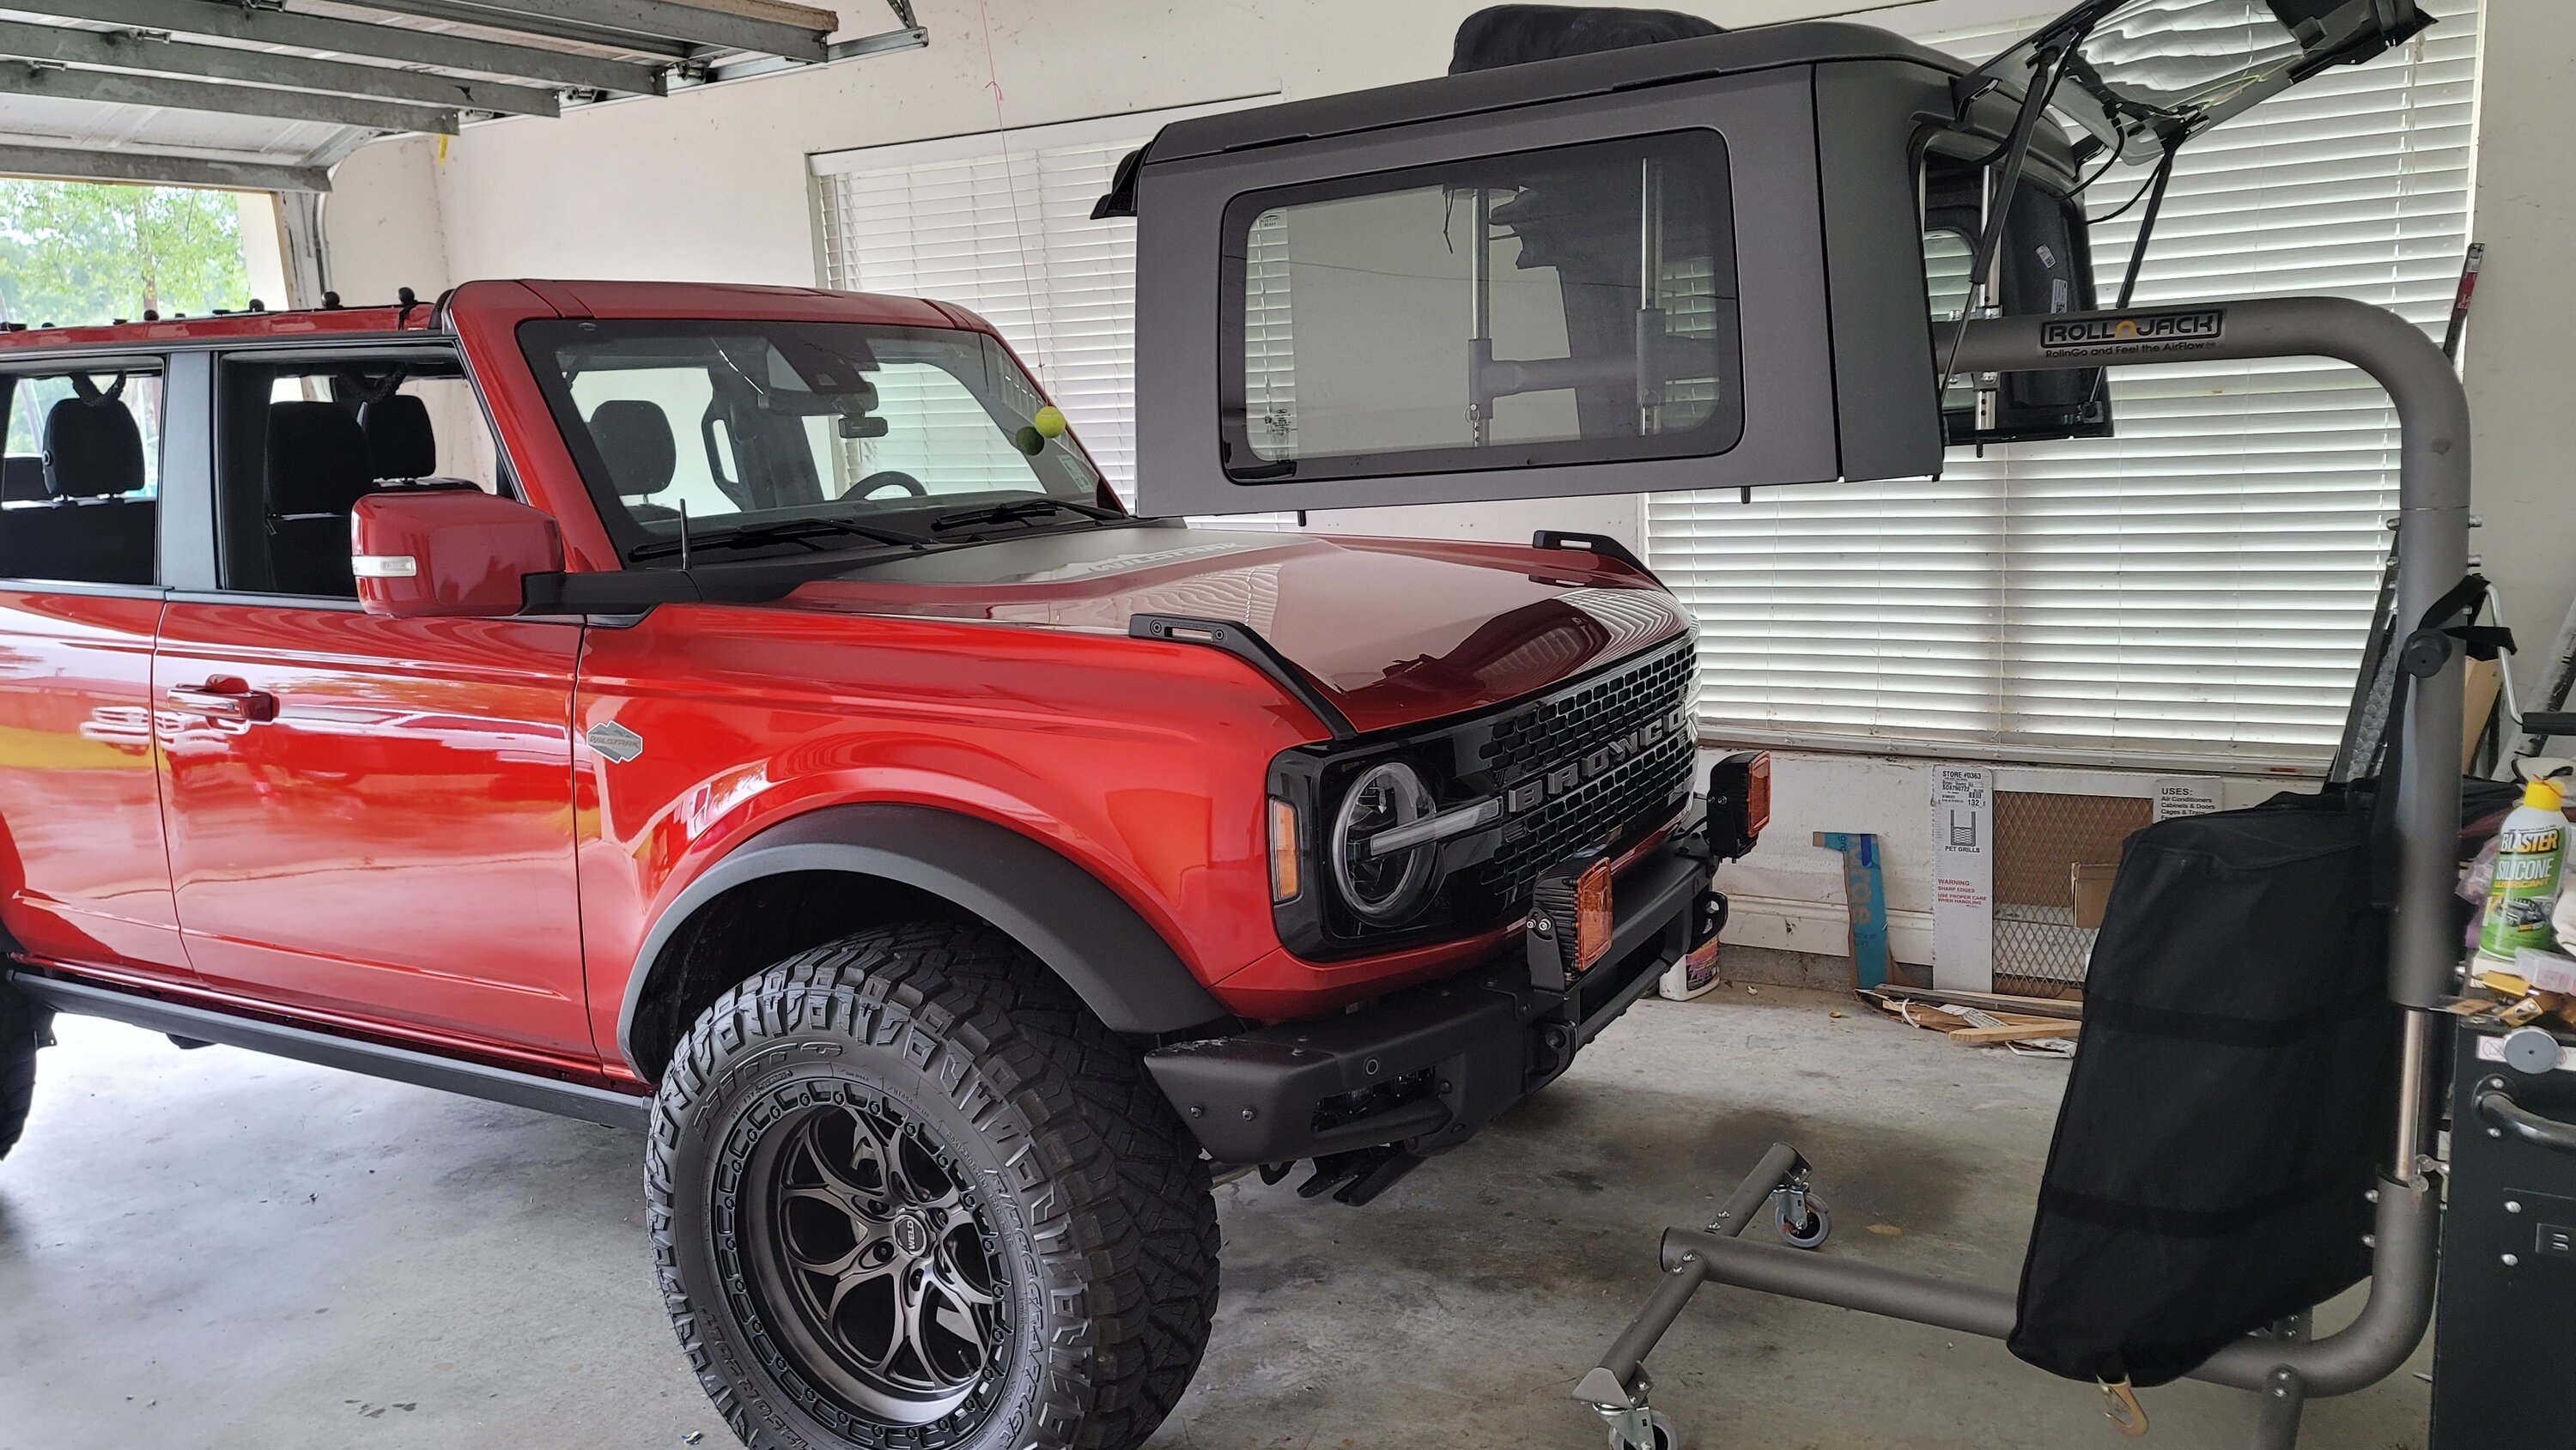 Ford Bronco Hello Everyone. Anyone tried or have any experience with RollnJack for hardtop removal? 20230524_164932